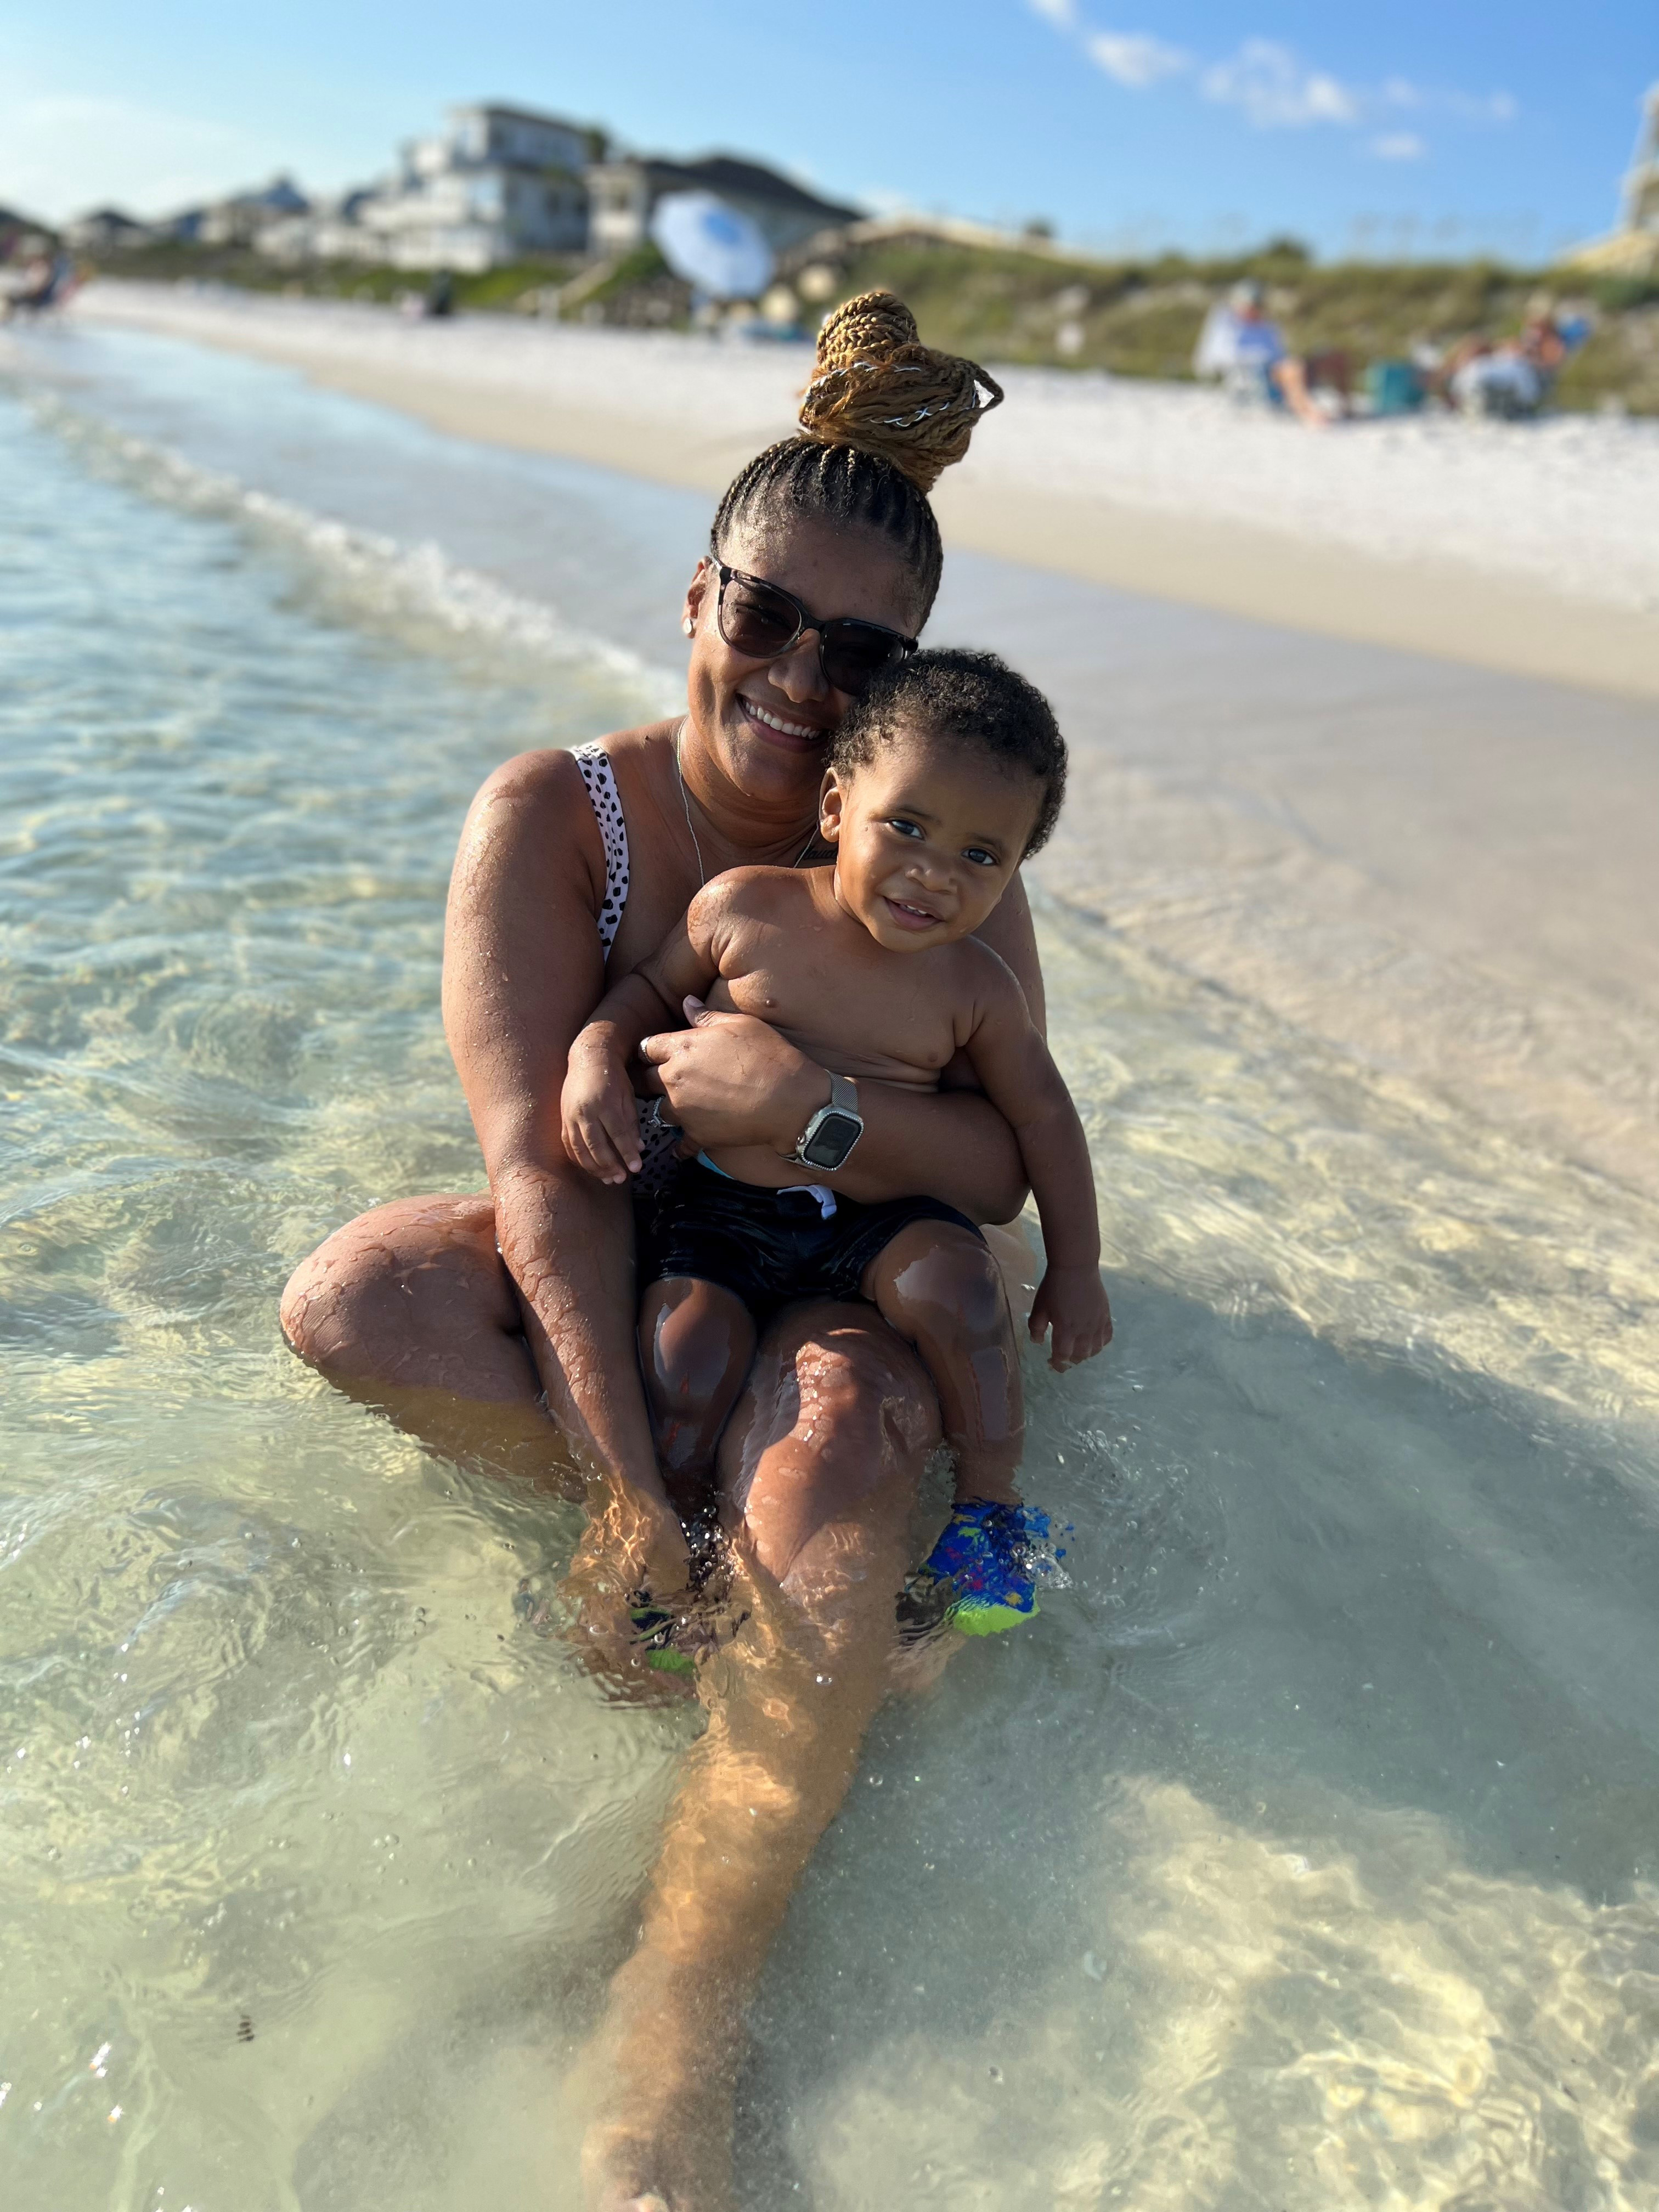 Mineka Furtch is sitting at the beach, in clear shallow water, with her 1-year old son in her lap.